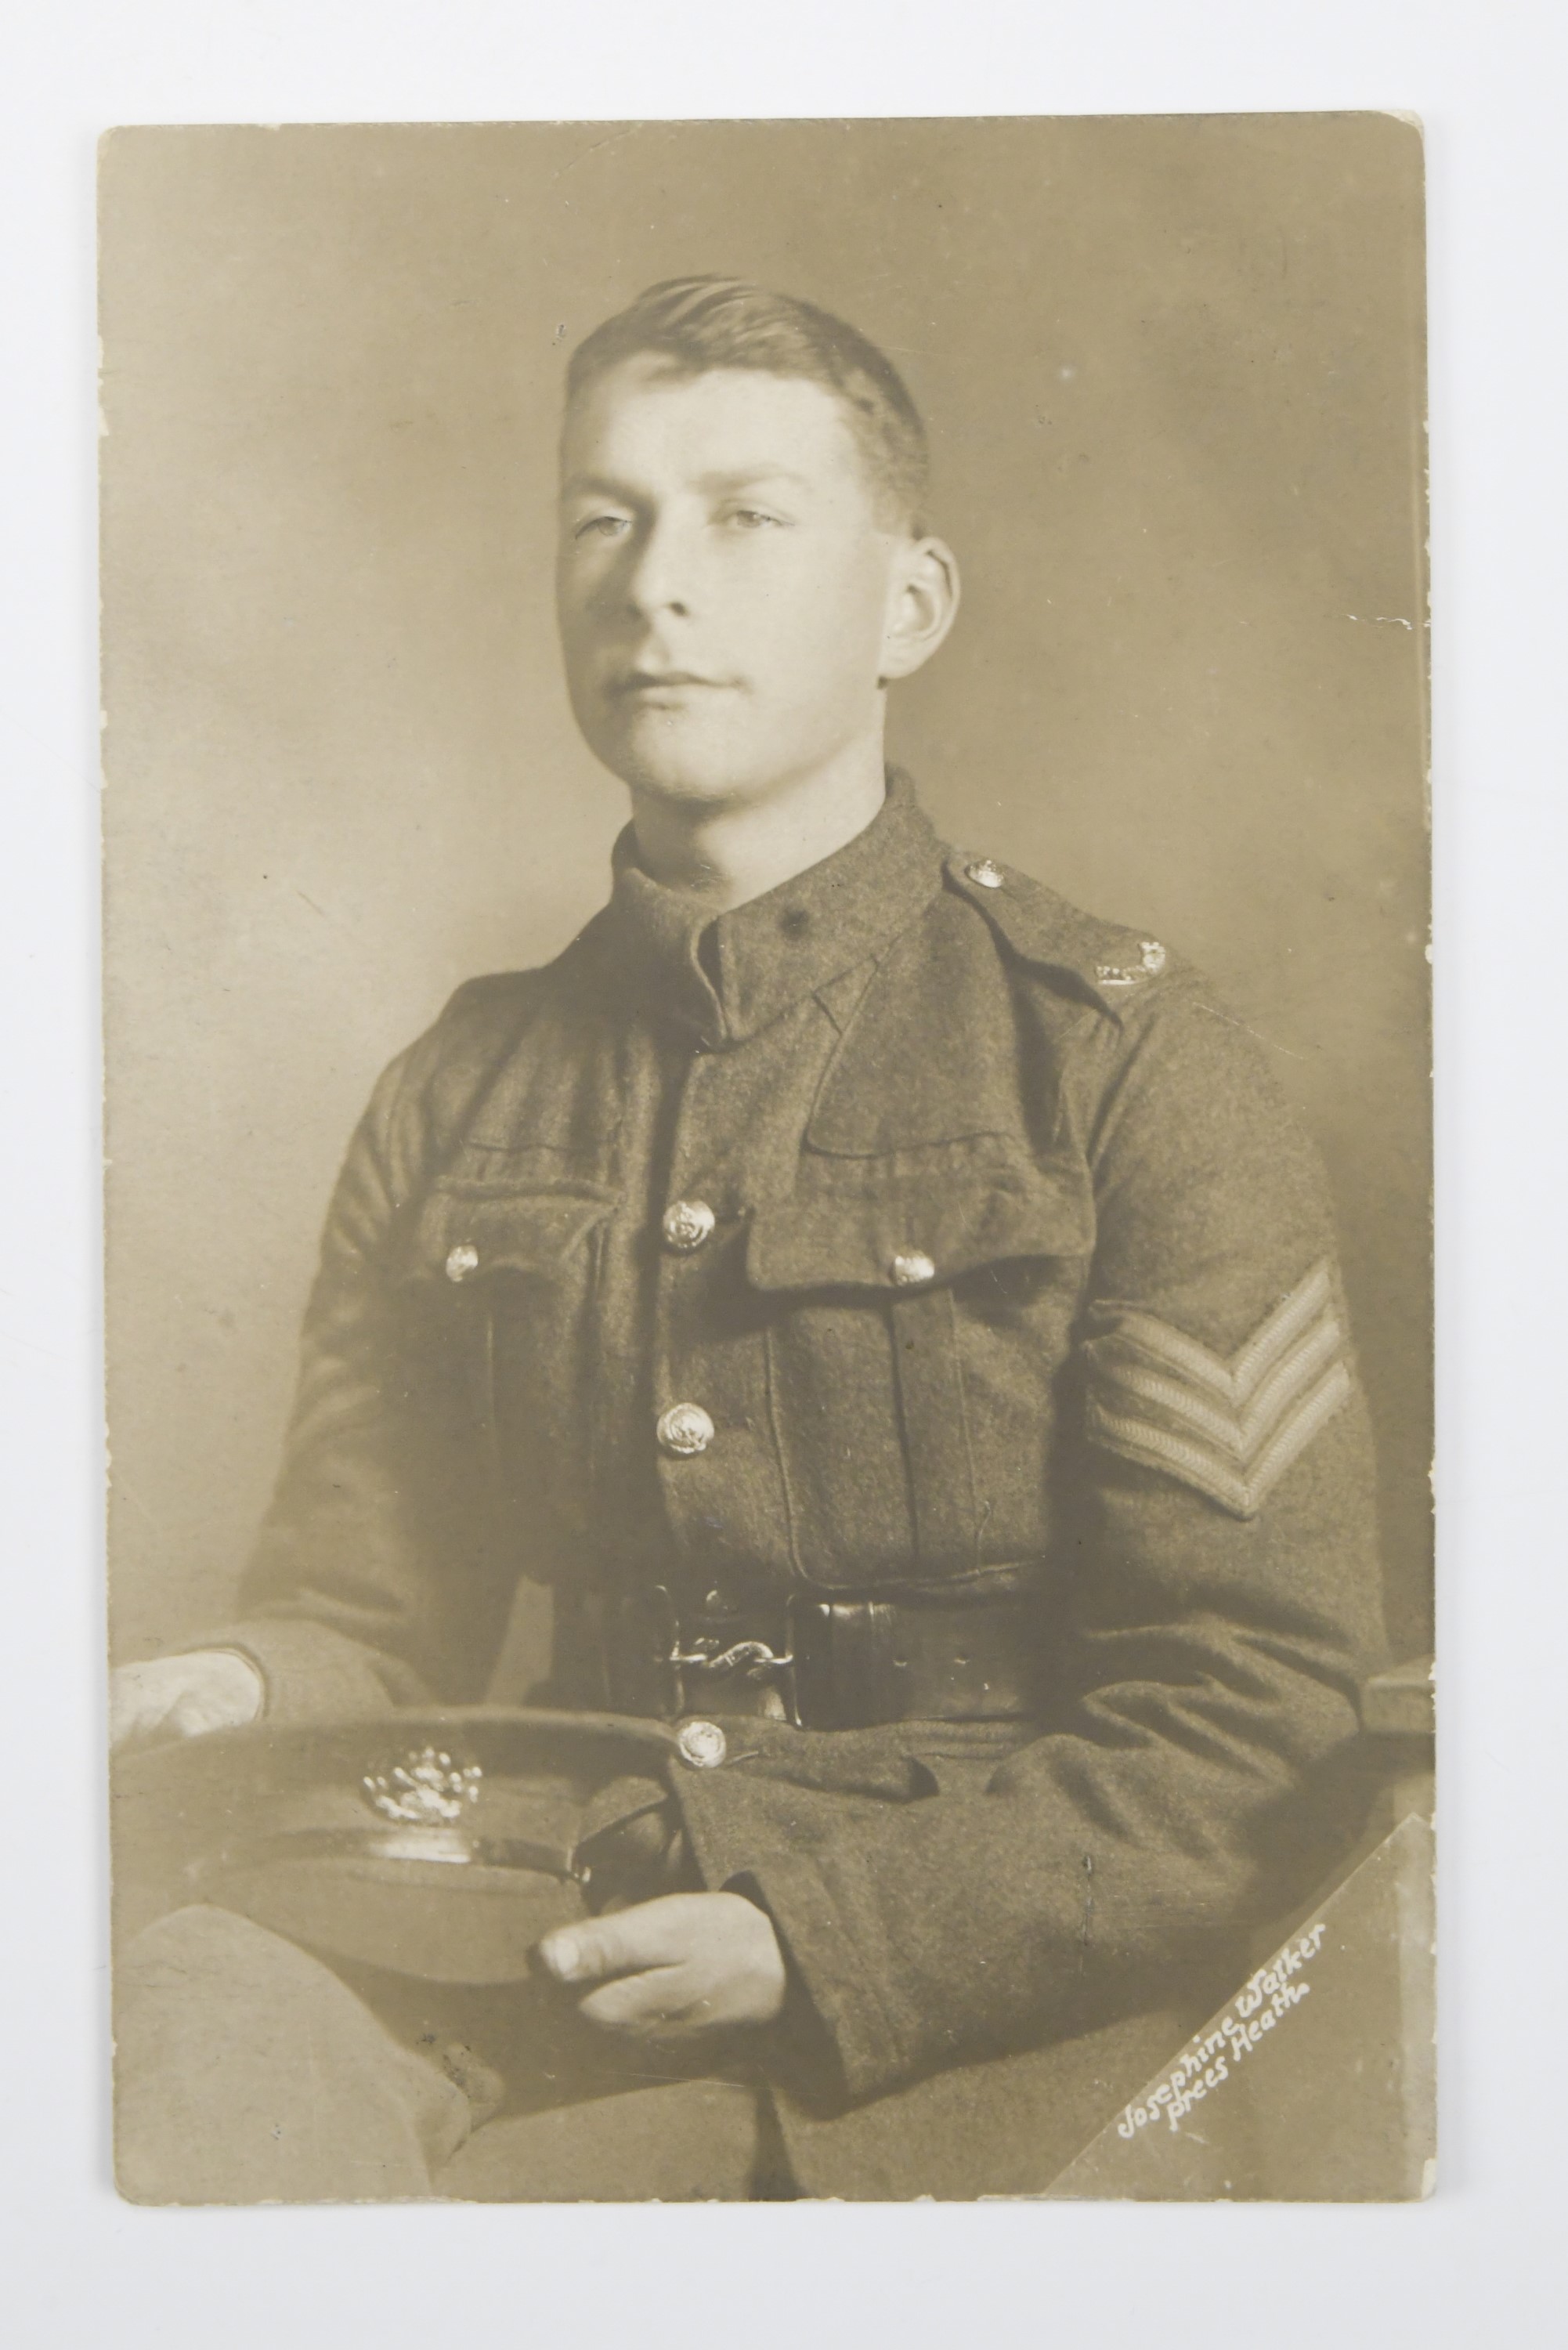 [ Victoria Cross ] A portrait postcard of Corporal Frank Lester. [Awarded the Victoria Cross for